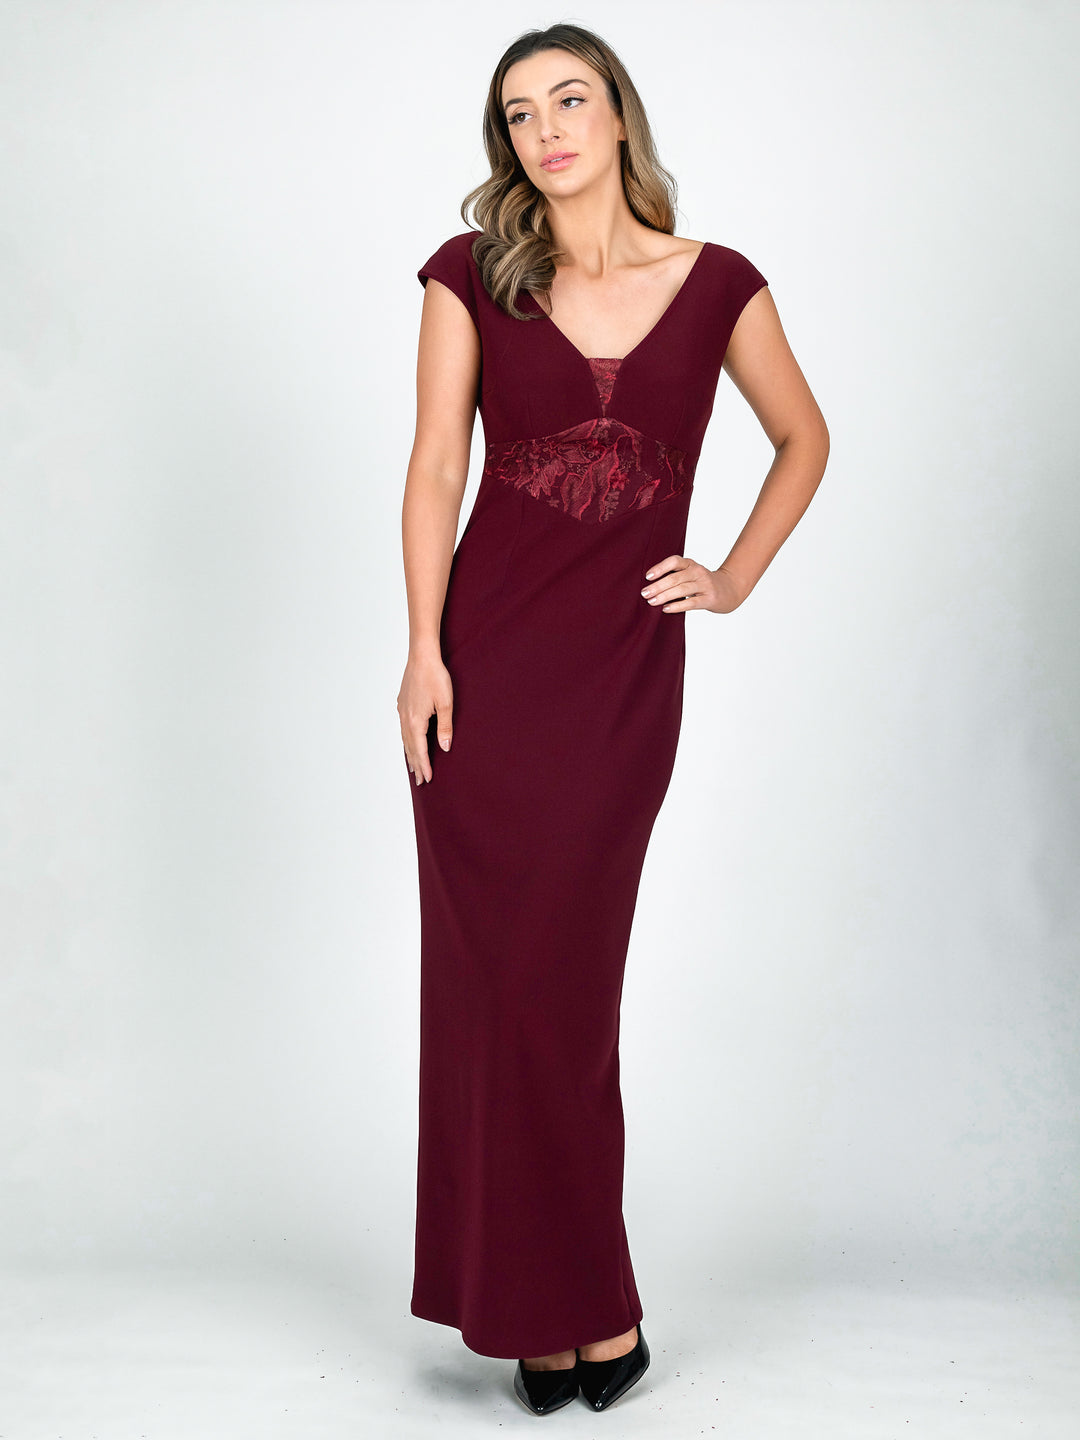 Lisa Barron floor length burgundy cap sleeve full length evening gown with v-neck and lace accent